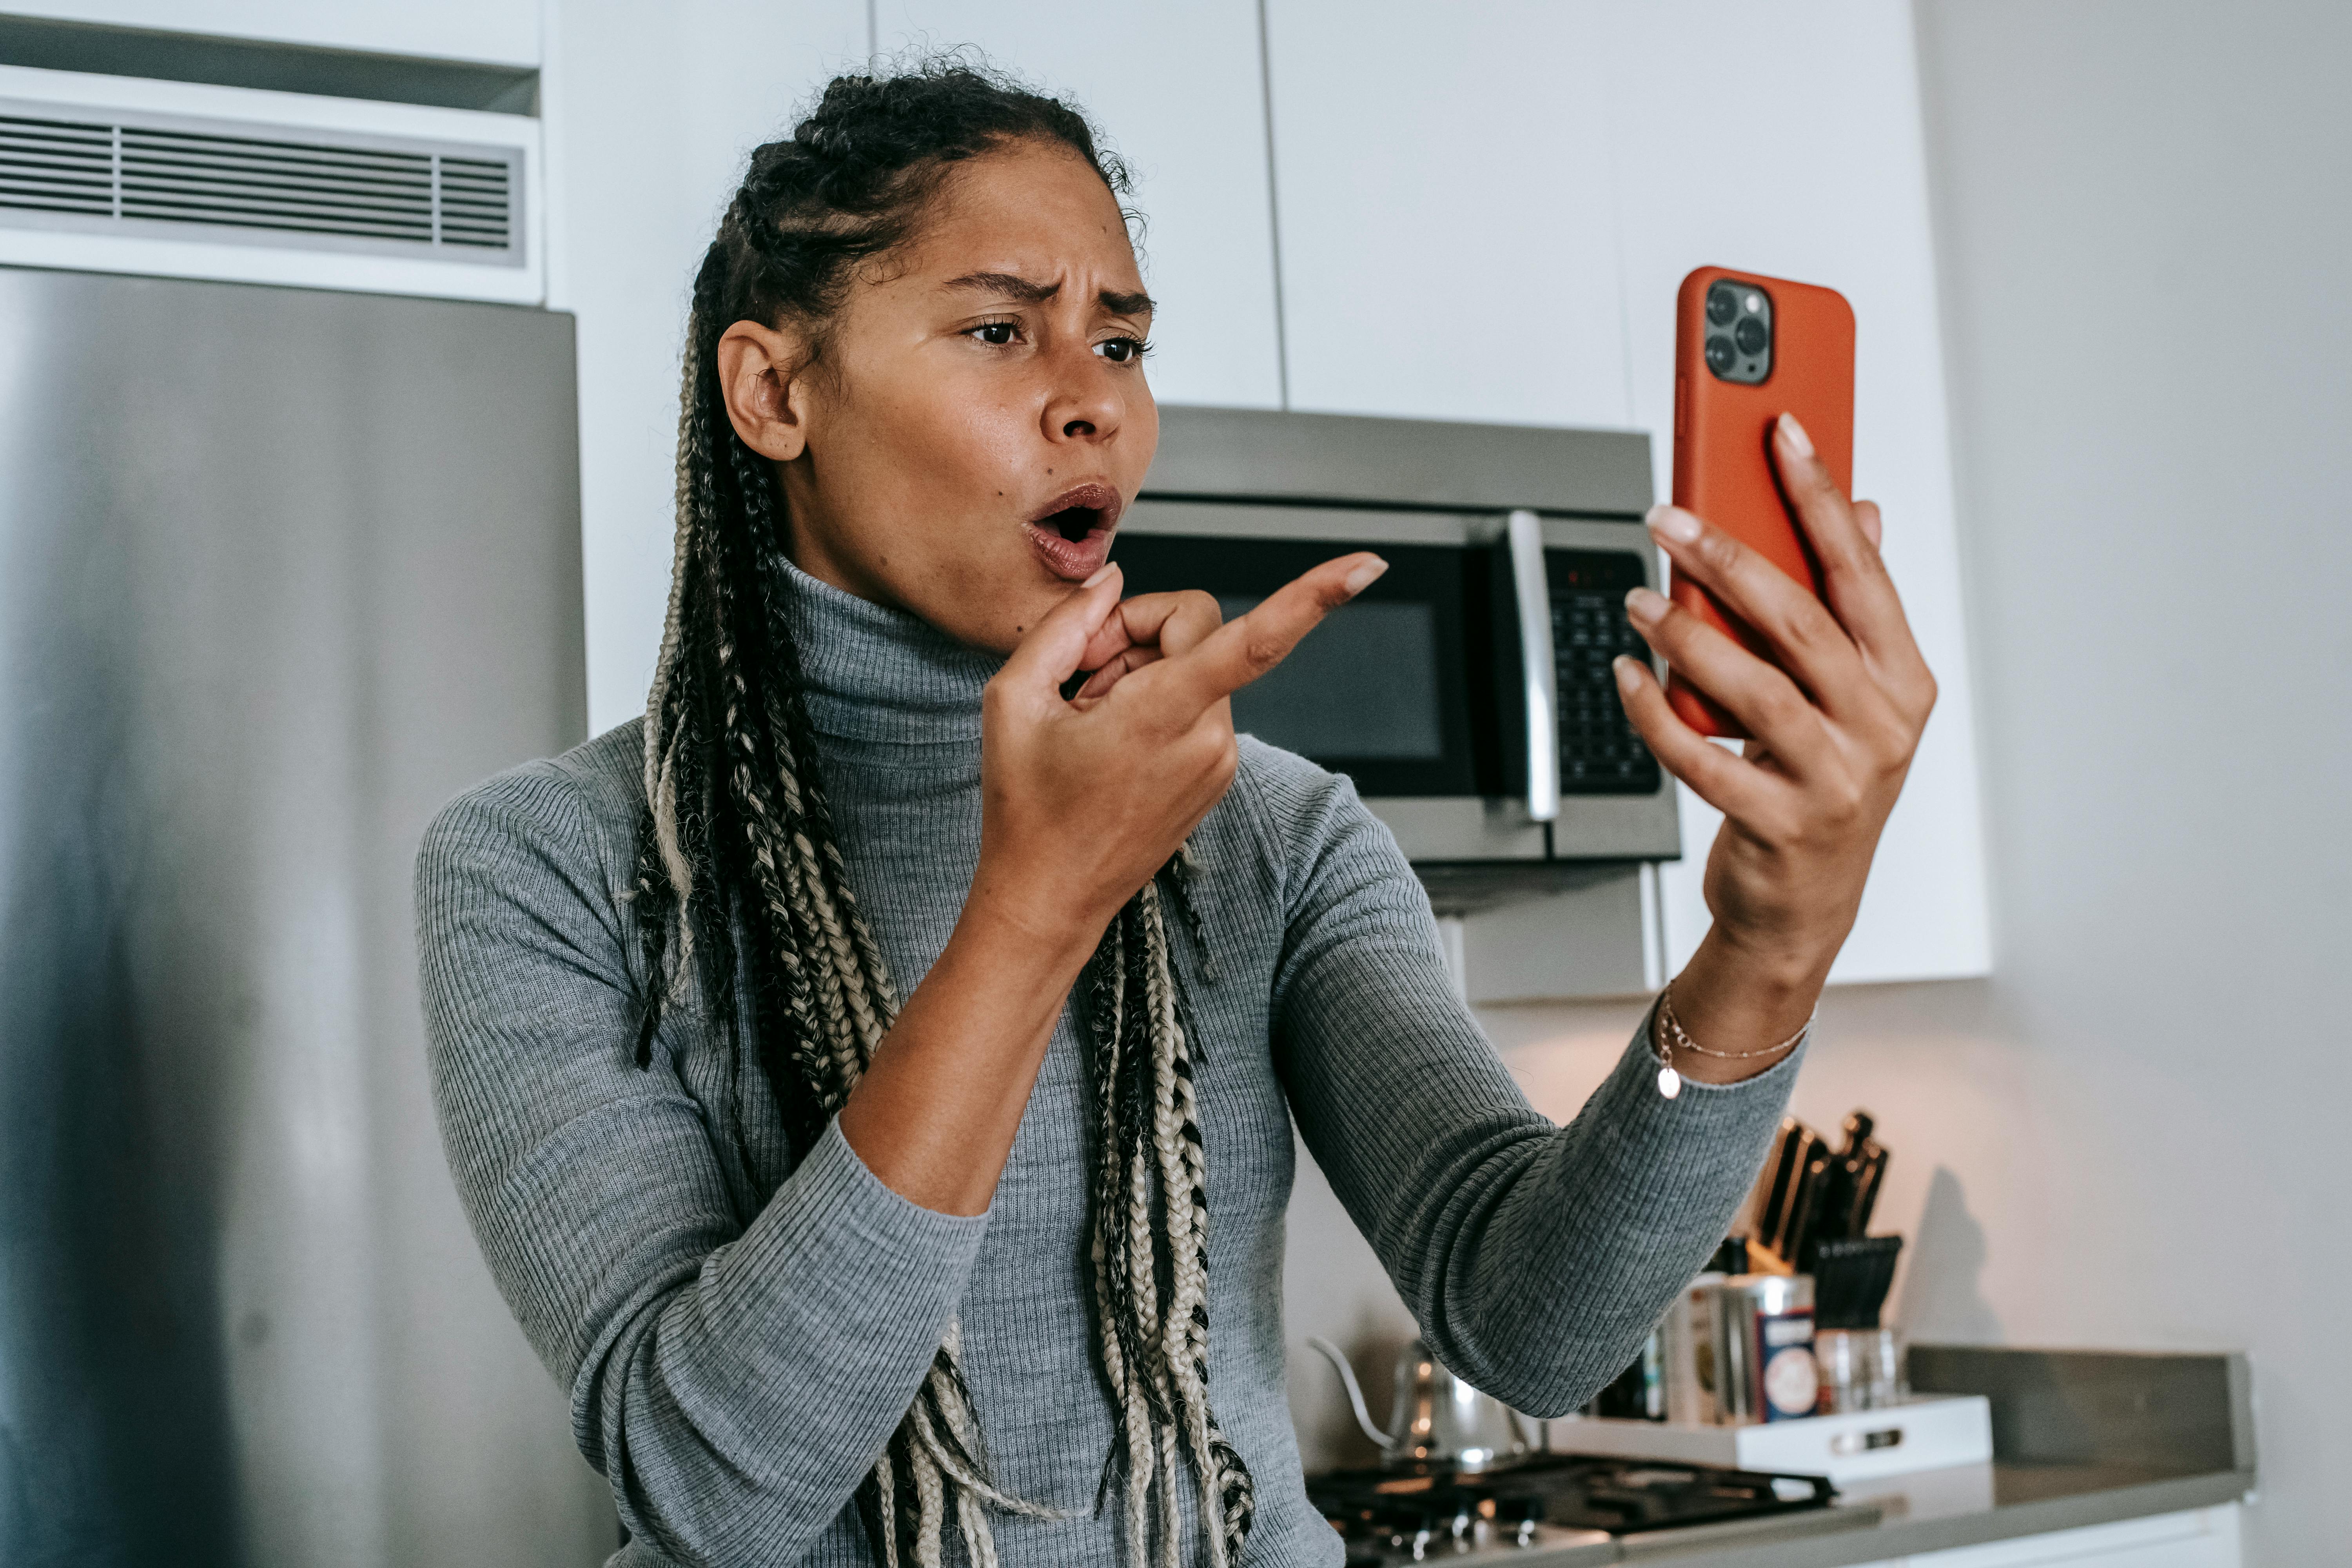 An angry woman on the phone | Source: Pexels